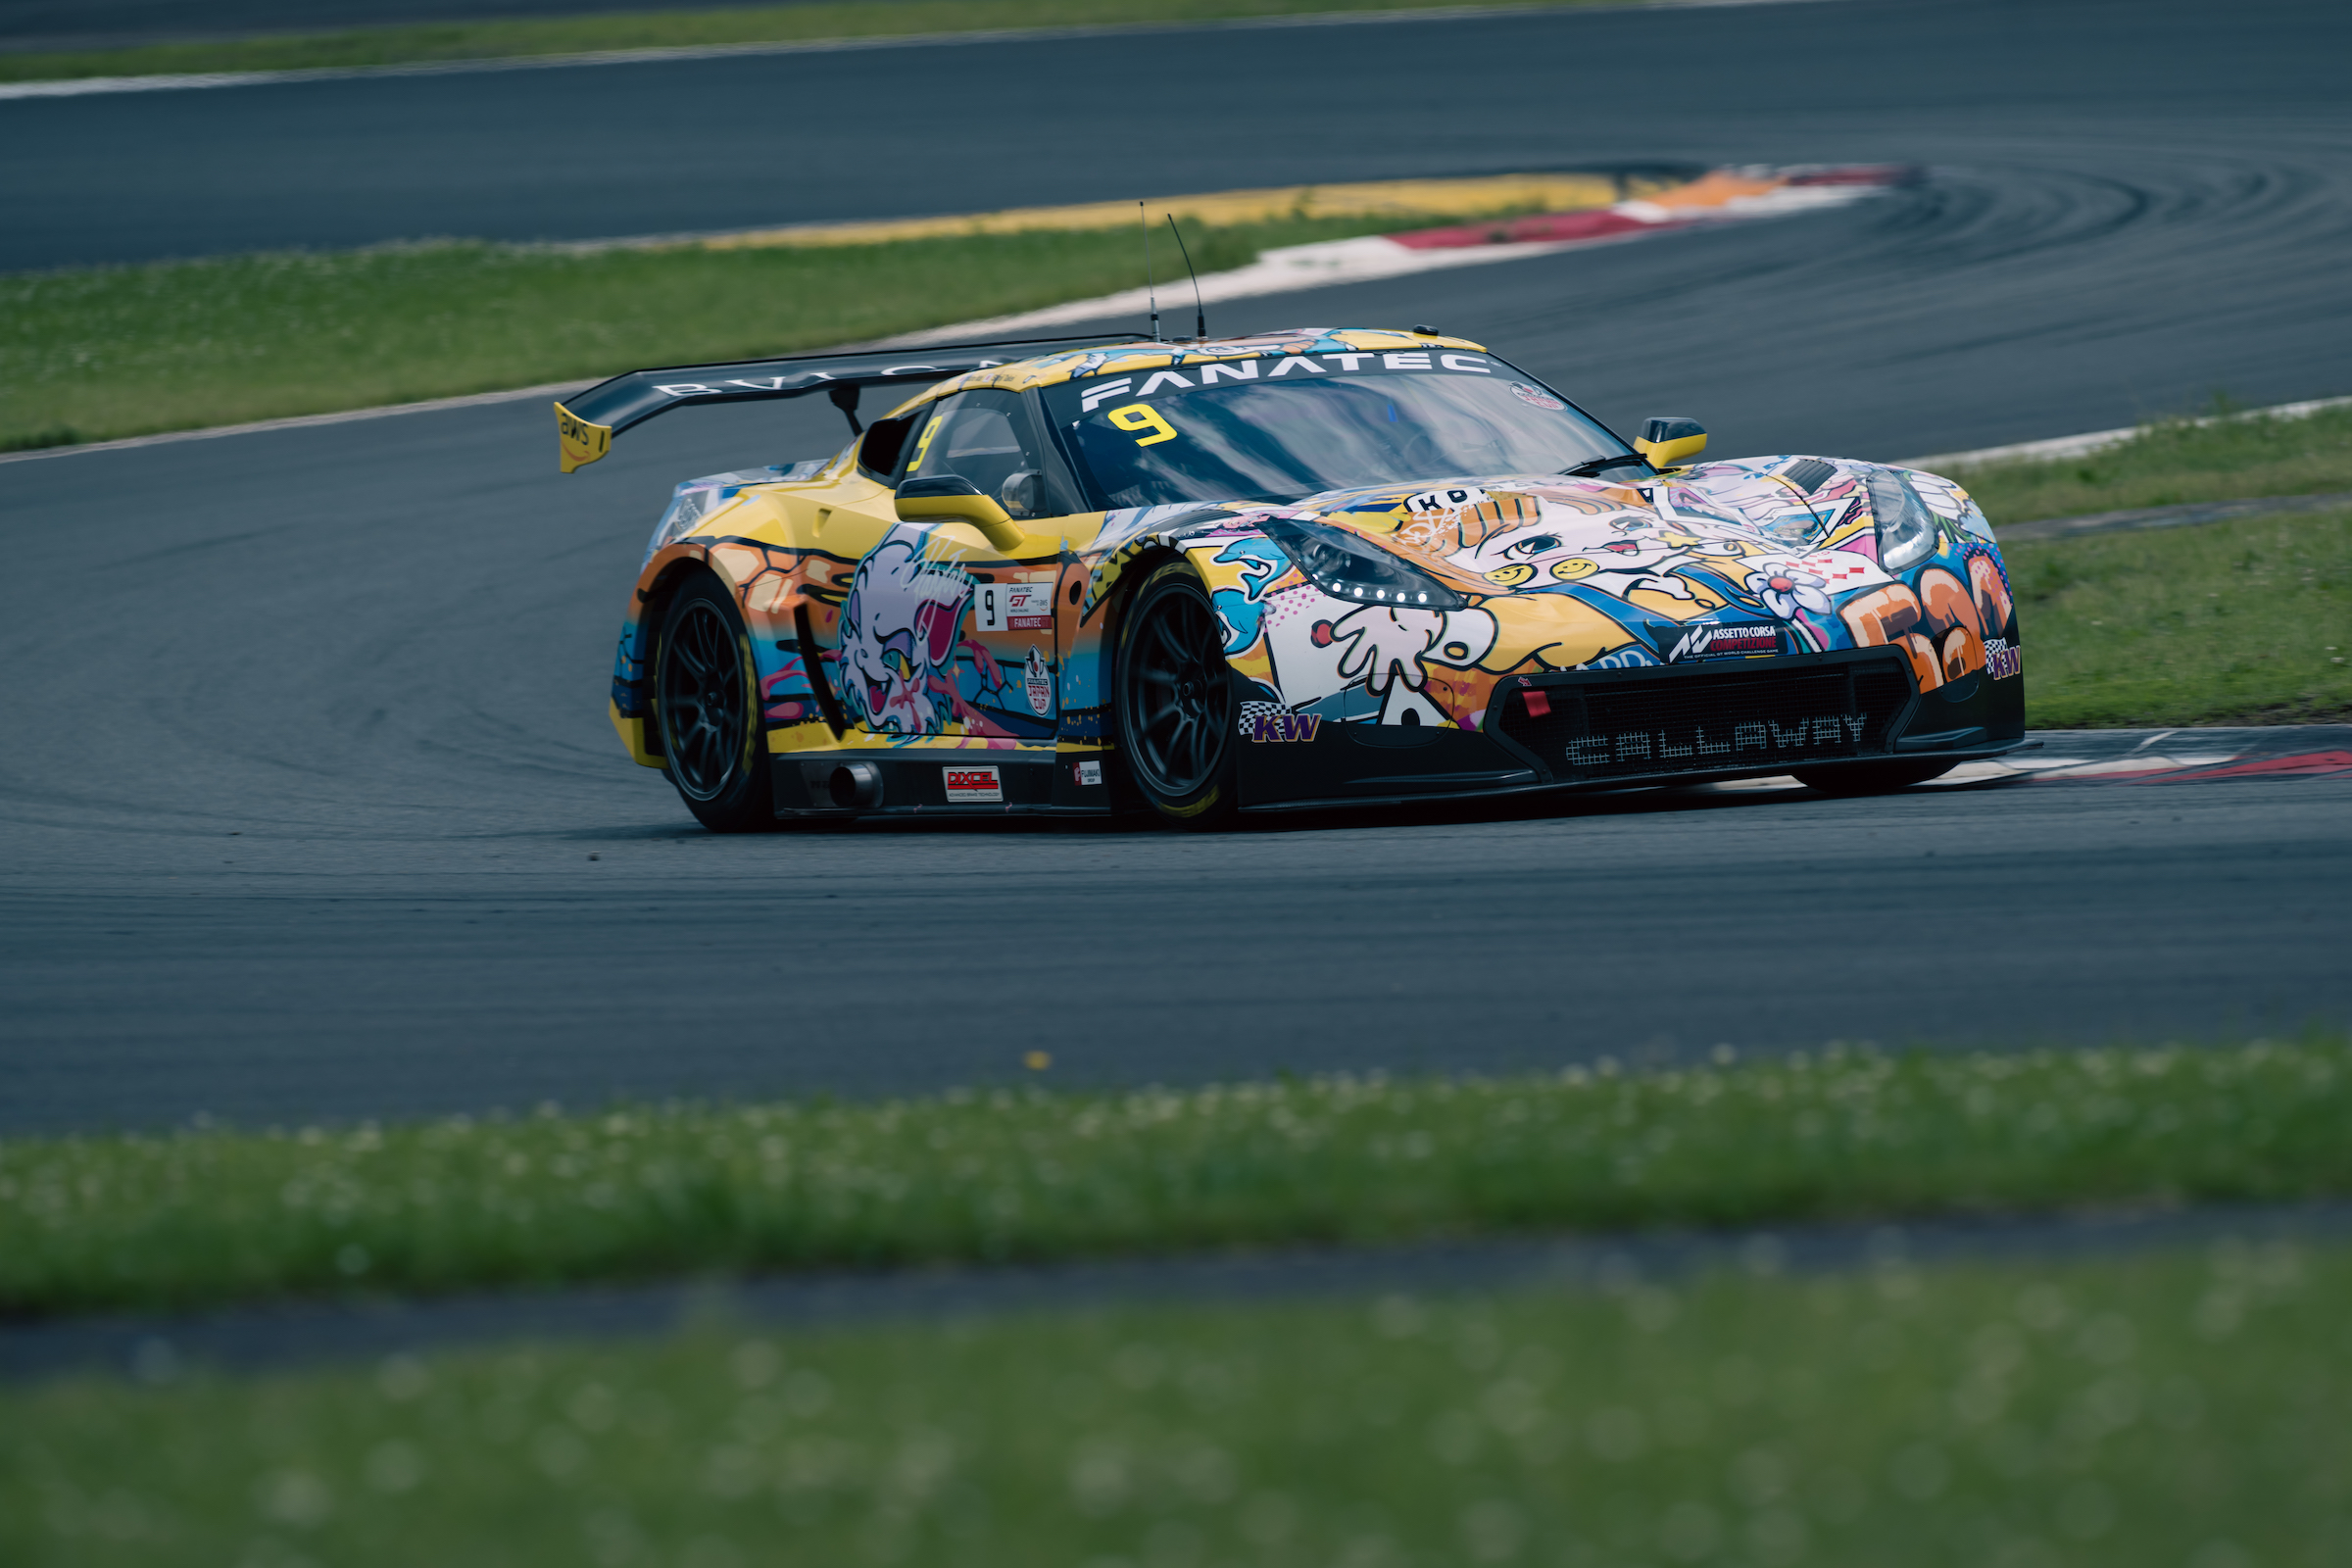 BINGO Racing and Callaway Competition Historic Victory in Race 1 of Fanatec GT World Challenge Asia at Fuji